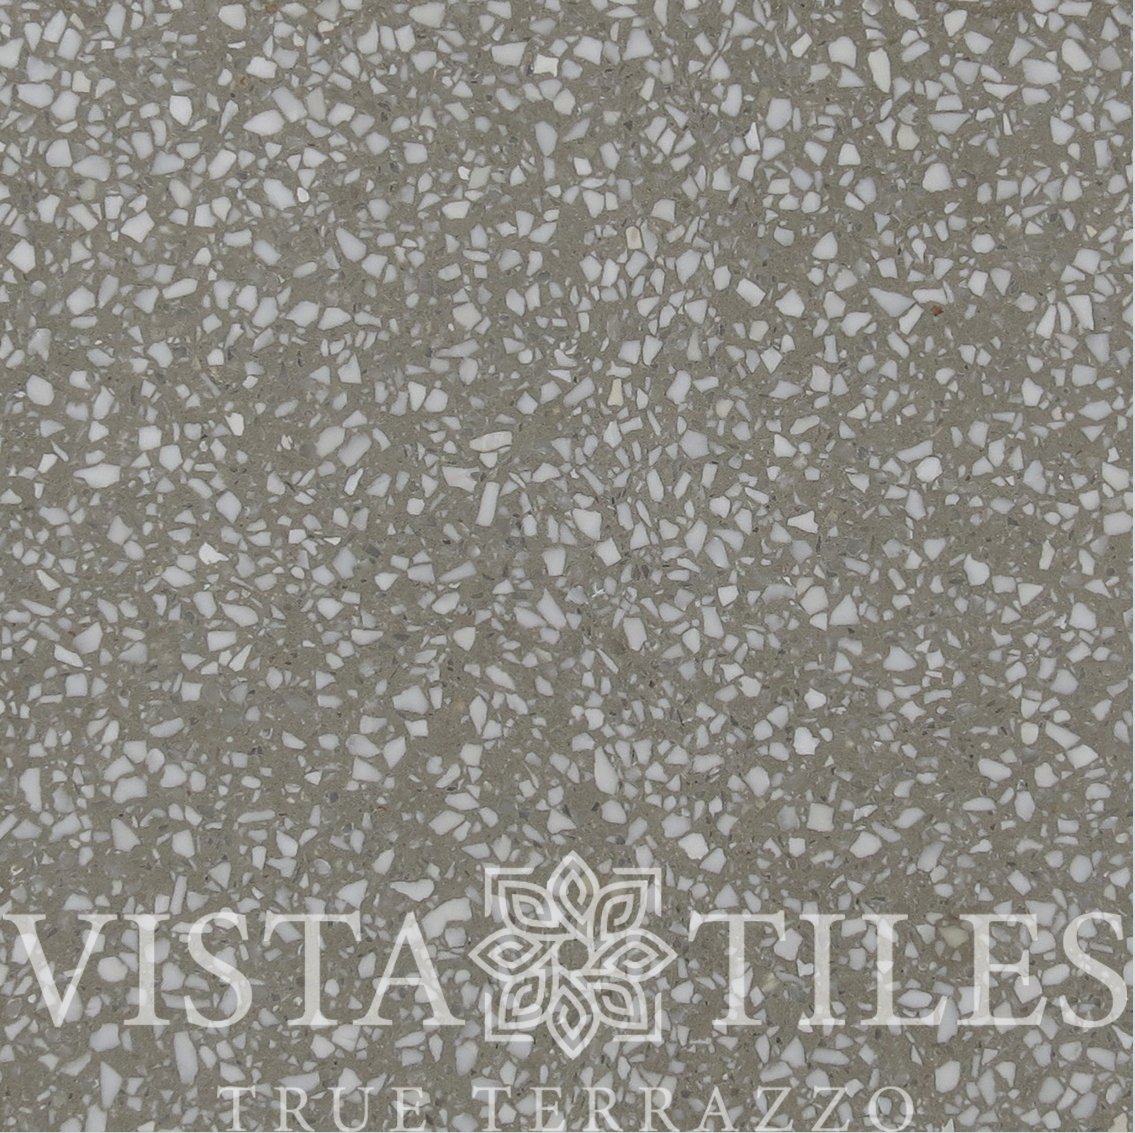 High Quality Precast Cement Base Terrazzo Floor Wall Tile For Indoor And Outdoor Commercial Residential Project 7x7 Sa 785